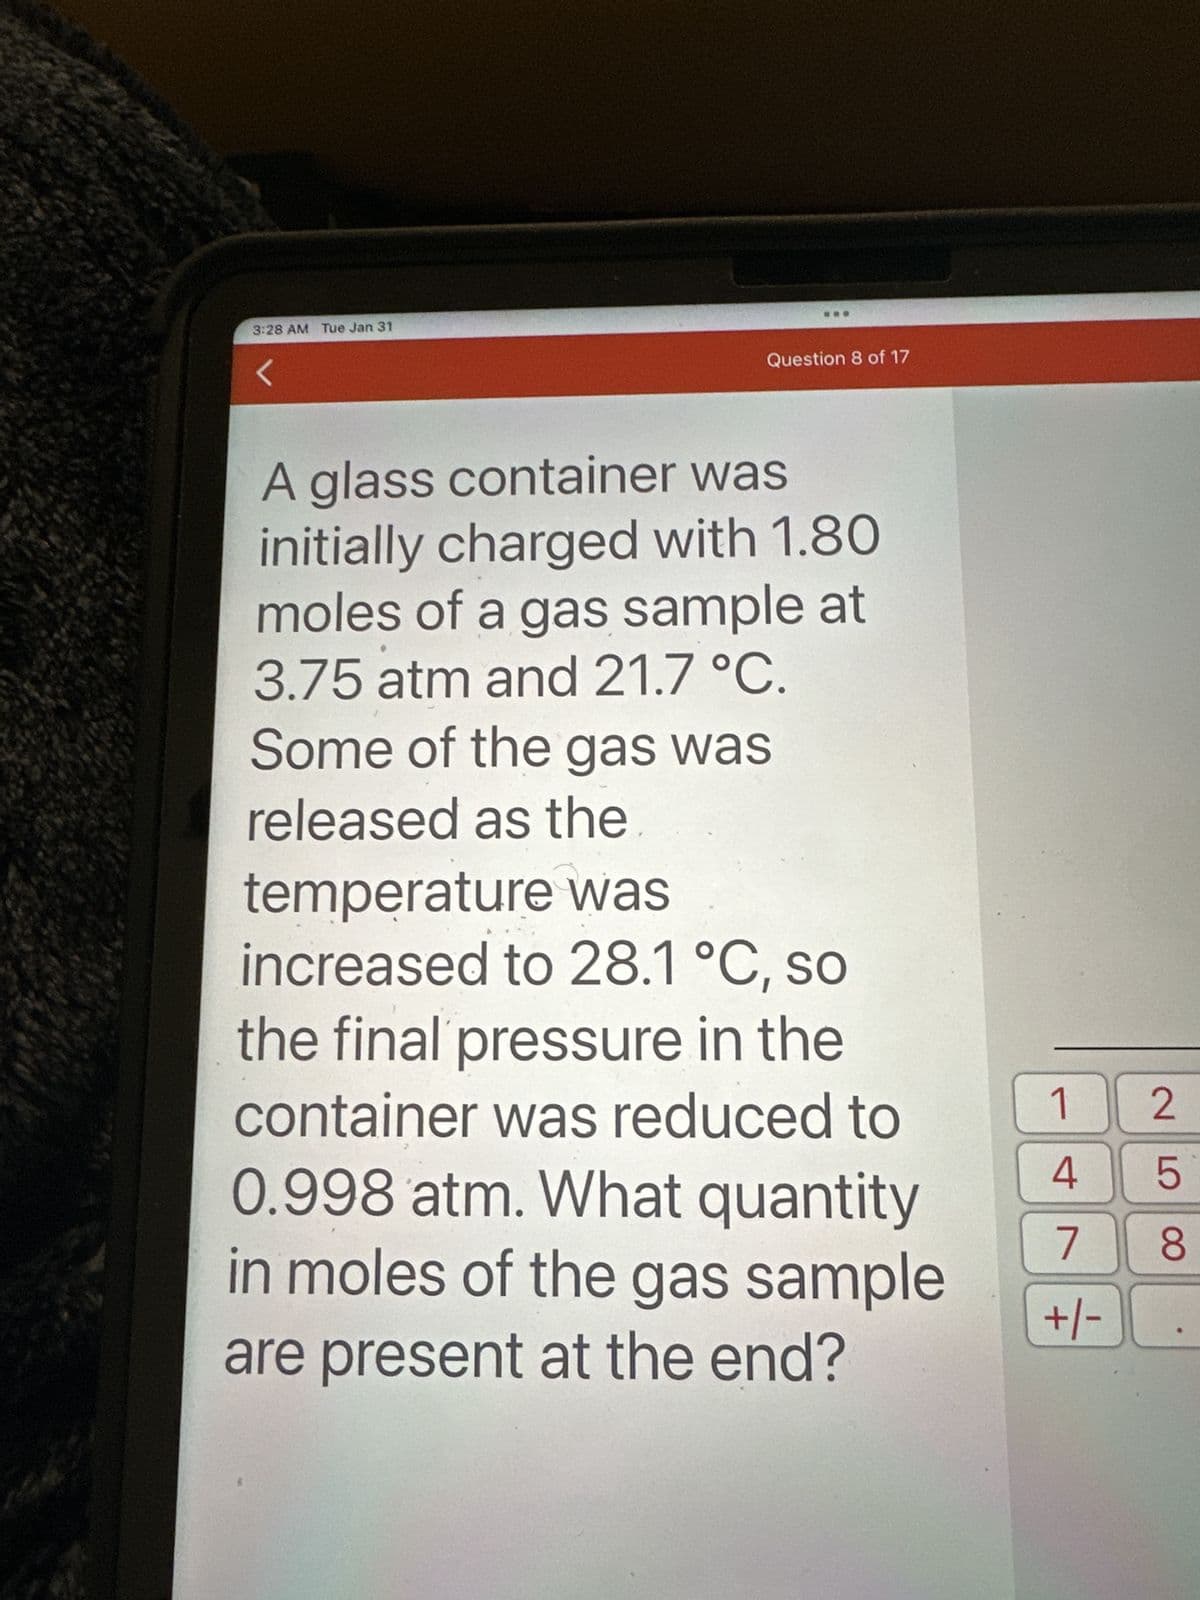 3:28 AM Tue Jan 31
<
Question 8 of 17
A glass container was
initially charged with 1.80
moles of a gas sample at
3.75 atm and 21.7 °C.
Some of the gas was
released as the
temperature was
increased to 28.1 °C, so
the final pressure in the
container was reduced to
0.998 atm. What quantity
in moles of the gas sample
are present at the end?
1
4
7
+/-
258